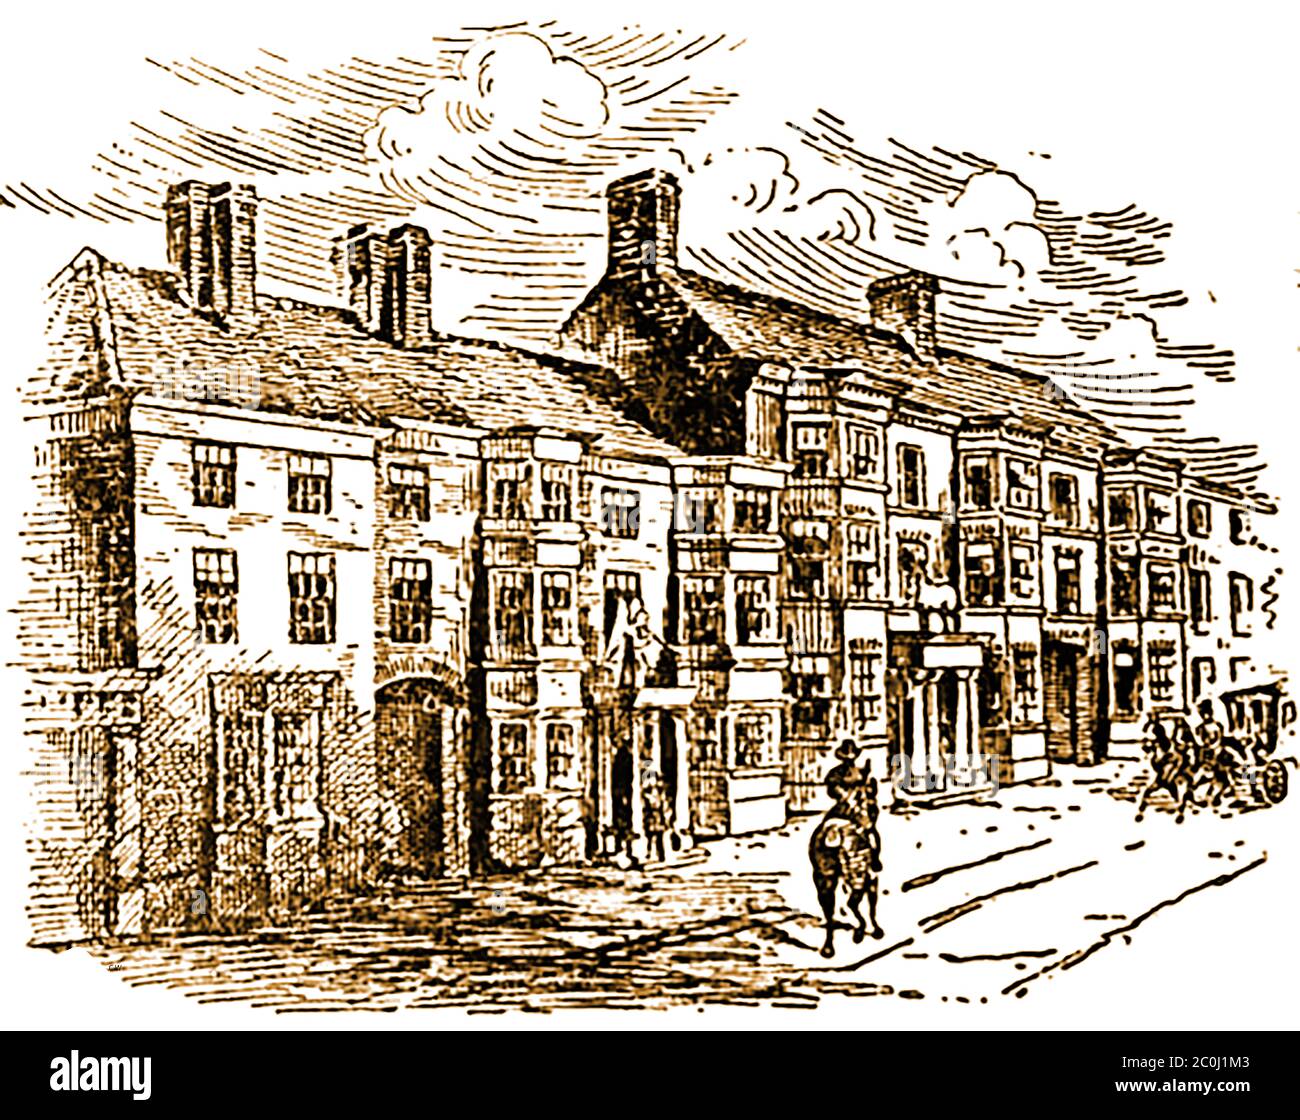 An old sketch of the Angel and White Horse Inns at Tadcaster, Yorkshire during the coaching era.  The Royal Mails were horsed between Tadcaster and Sherburn by Mr. Kidd, of the Angel, but these coaches changed horses at the Rose and Crown, which was situate at the top of the hill over the bridge. The White Horse, later became known as the Londesborough Hotel. It was the principal of the three Tadcaster coaching inns. In 1777. Mr. William Backhouse succeeded Mr. Todd at the White Horse, and from that time it remained in this family until the end of the coaching days. Stock Photo